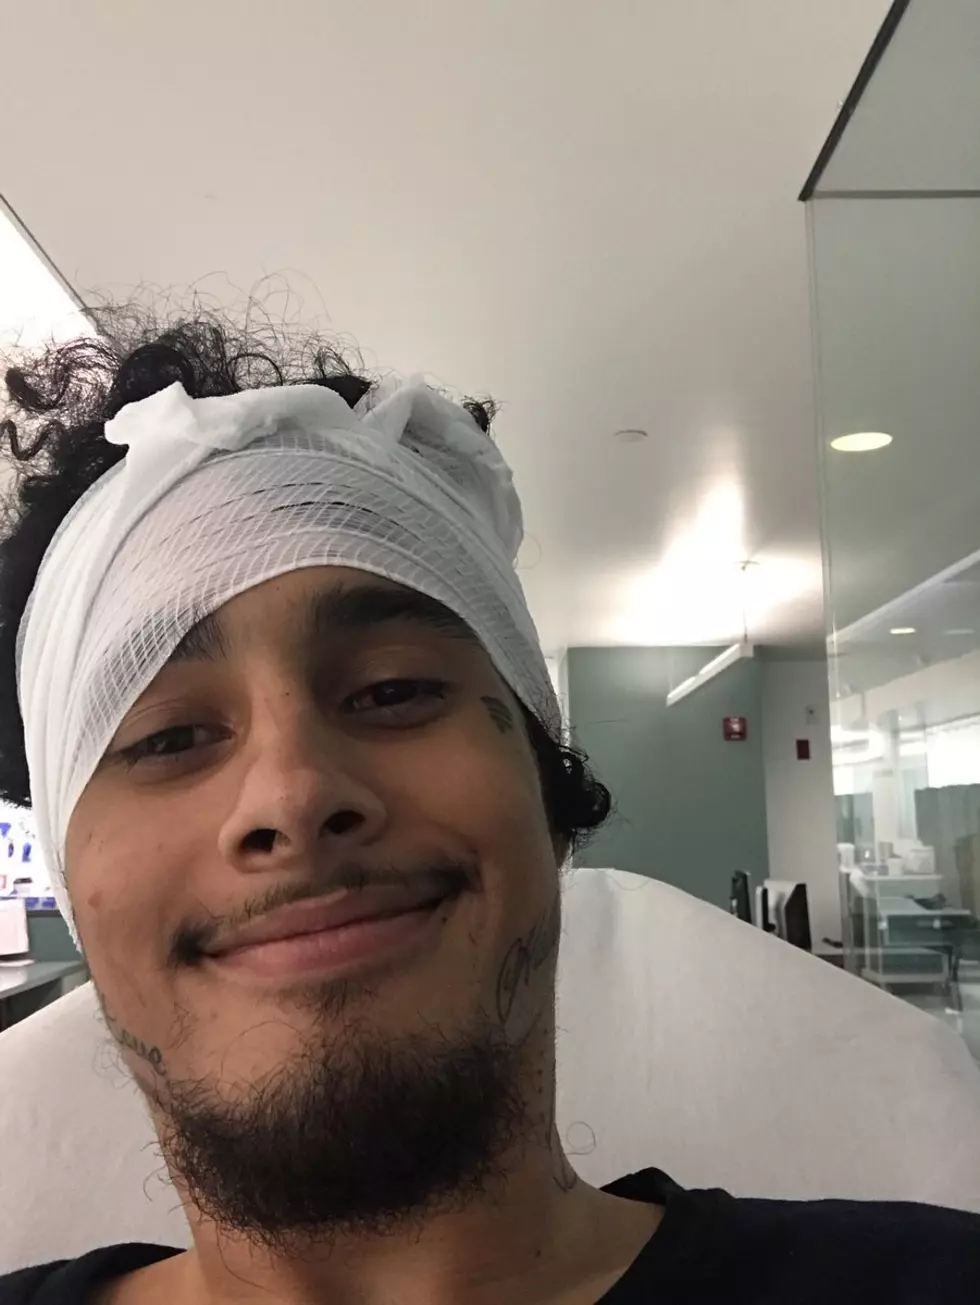 Wifisfuneral Tells His Side of the Story About Getting Jumped at XXXTentacion&#8217;s Houston Show